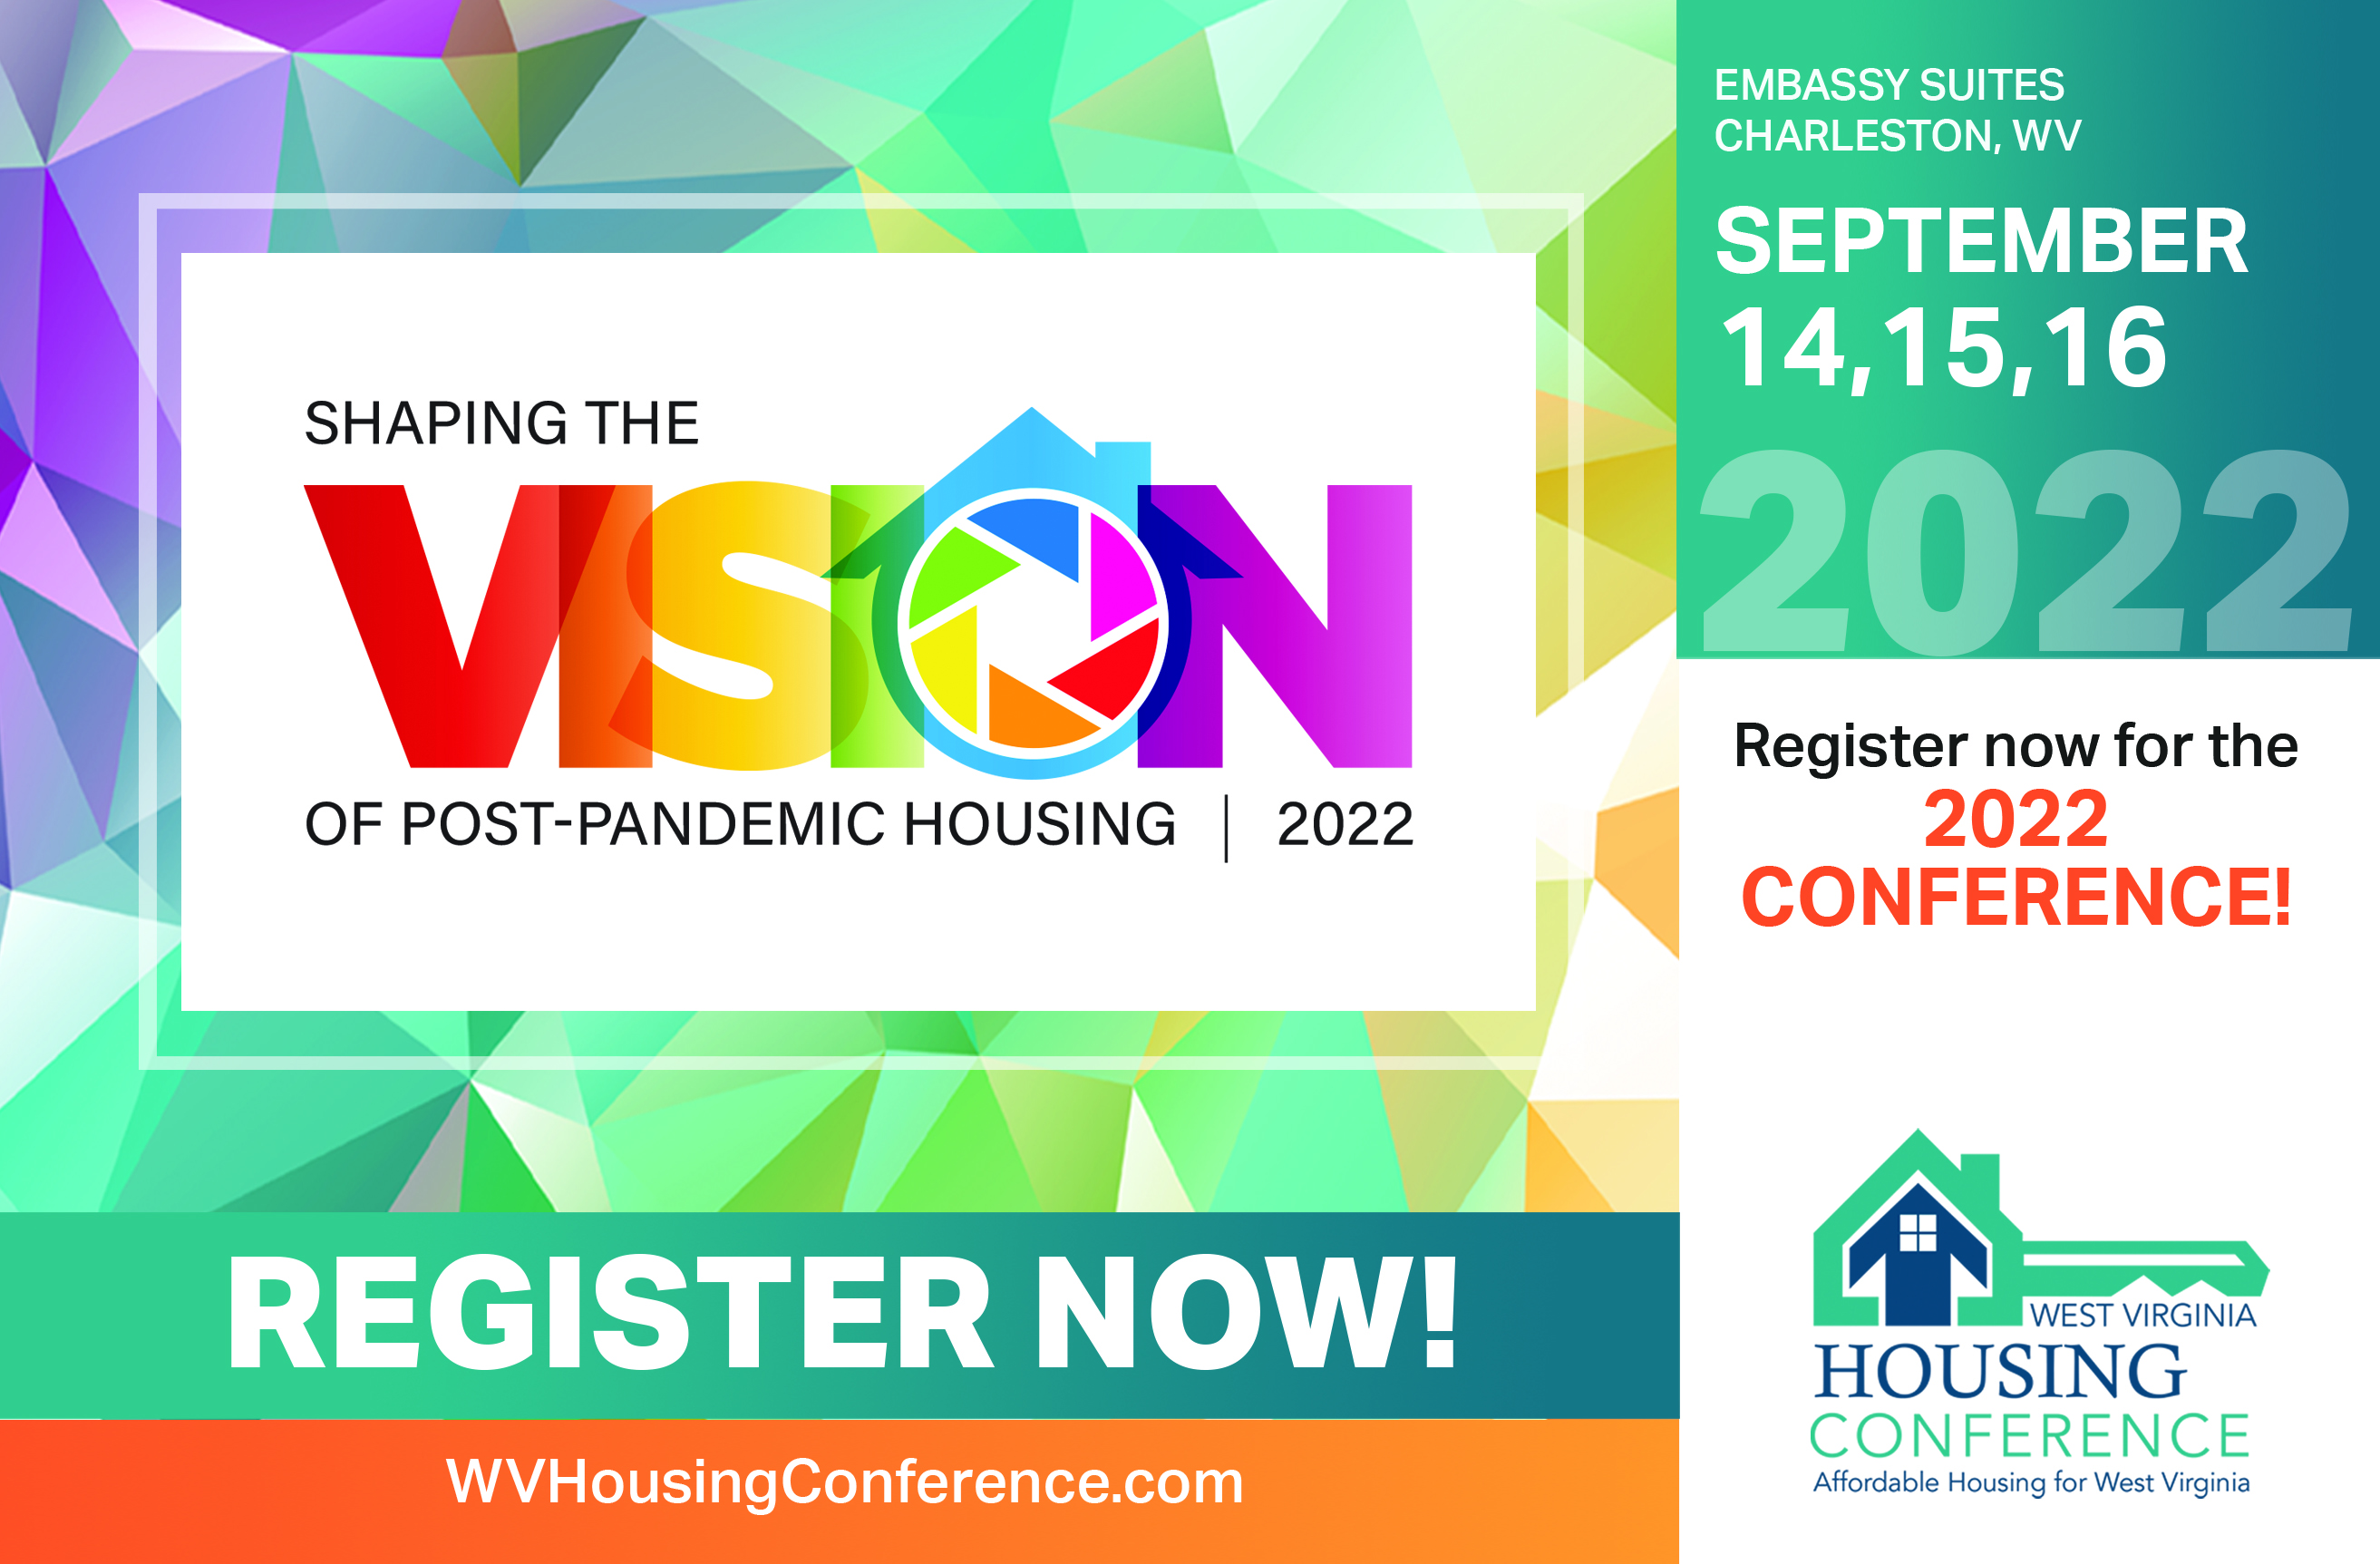 2022 WV Housing Conference - REGISTER NOW!